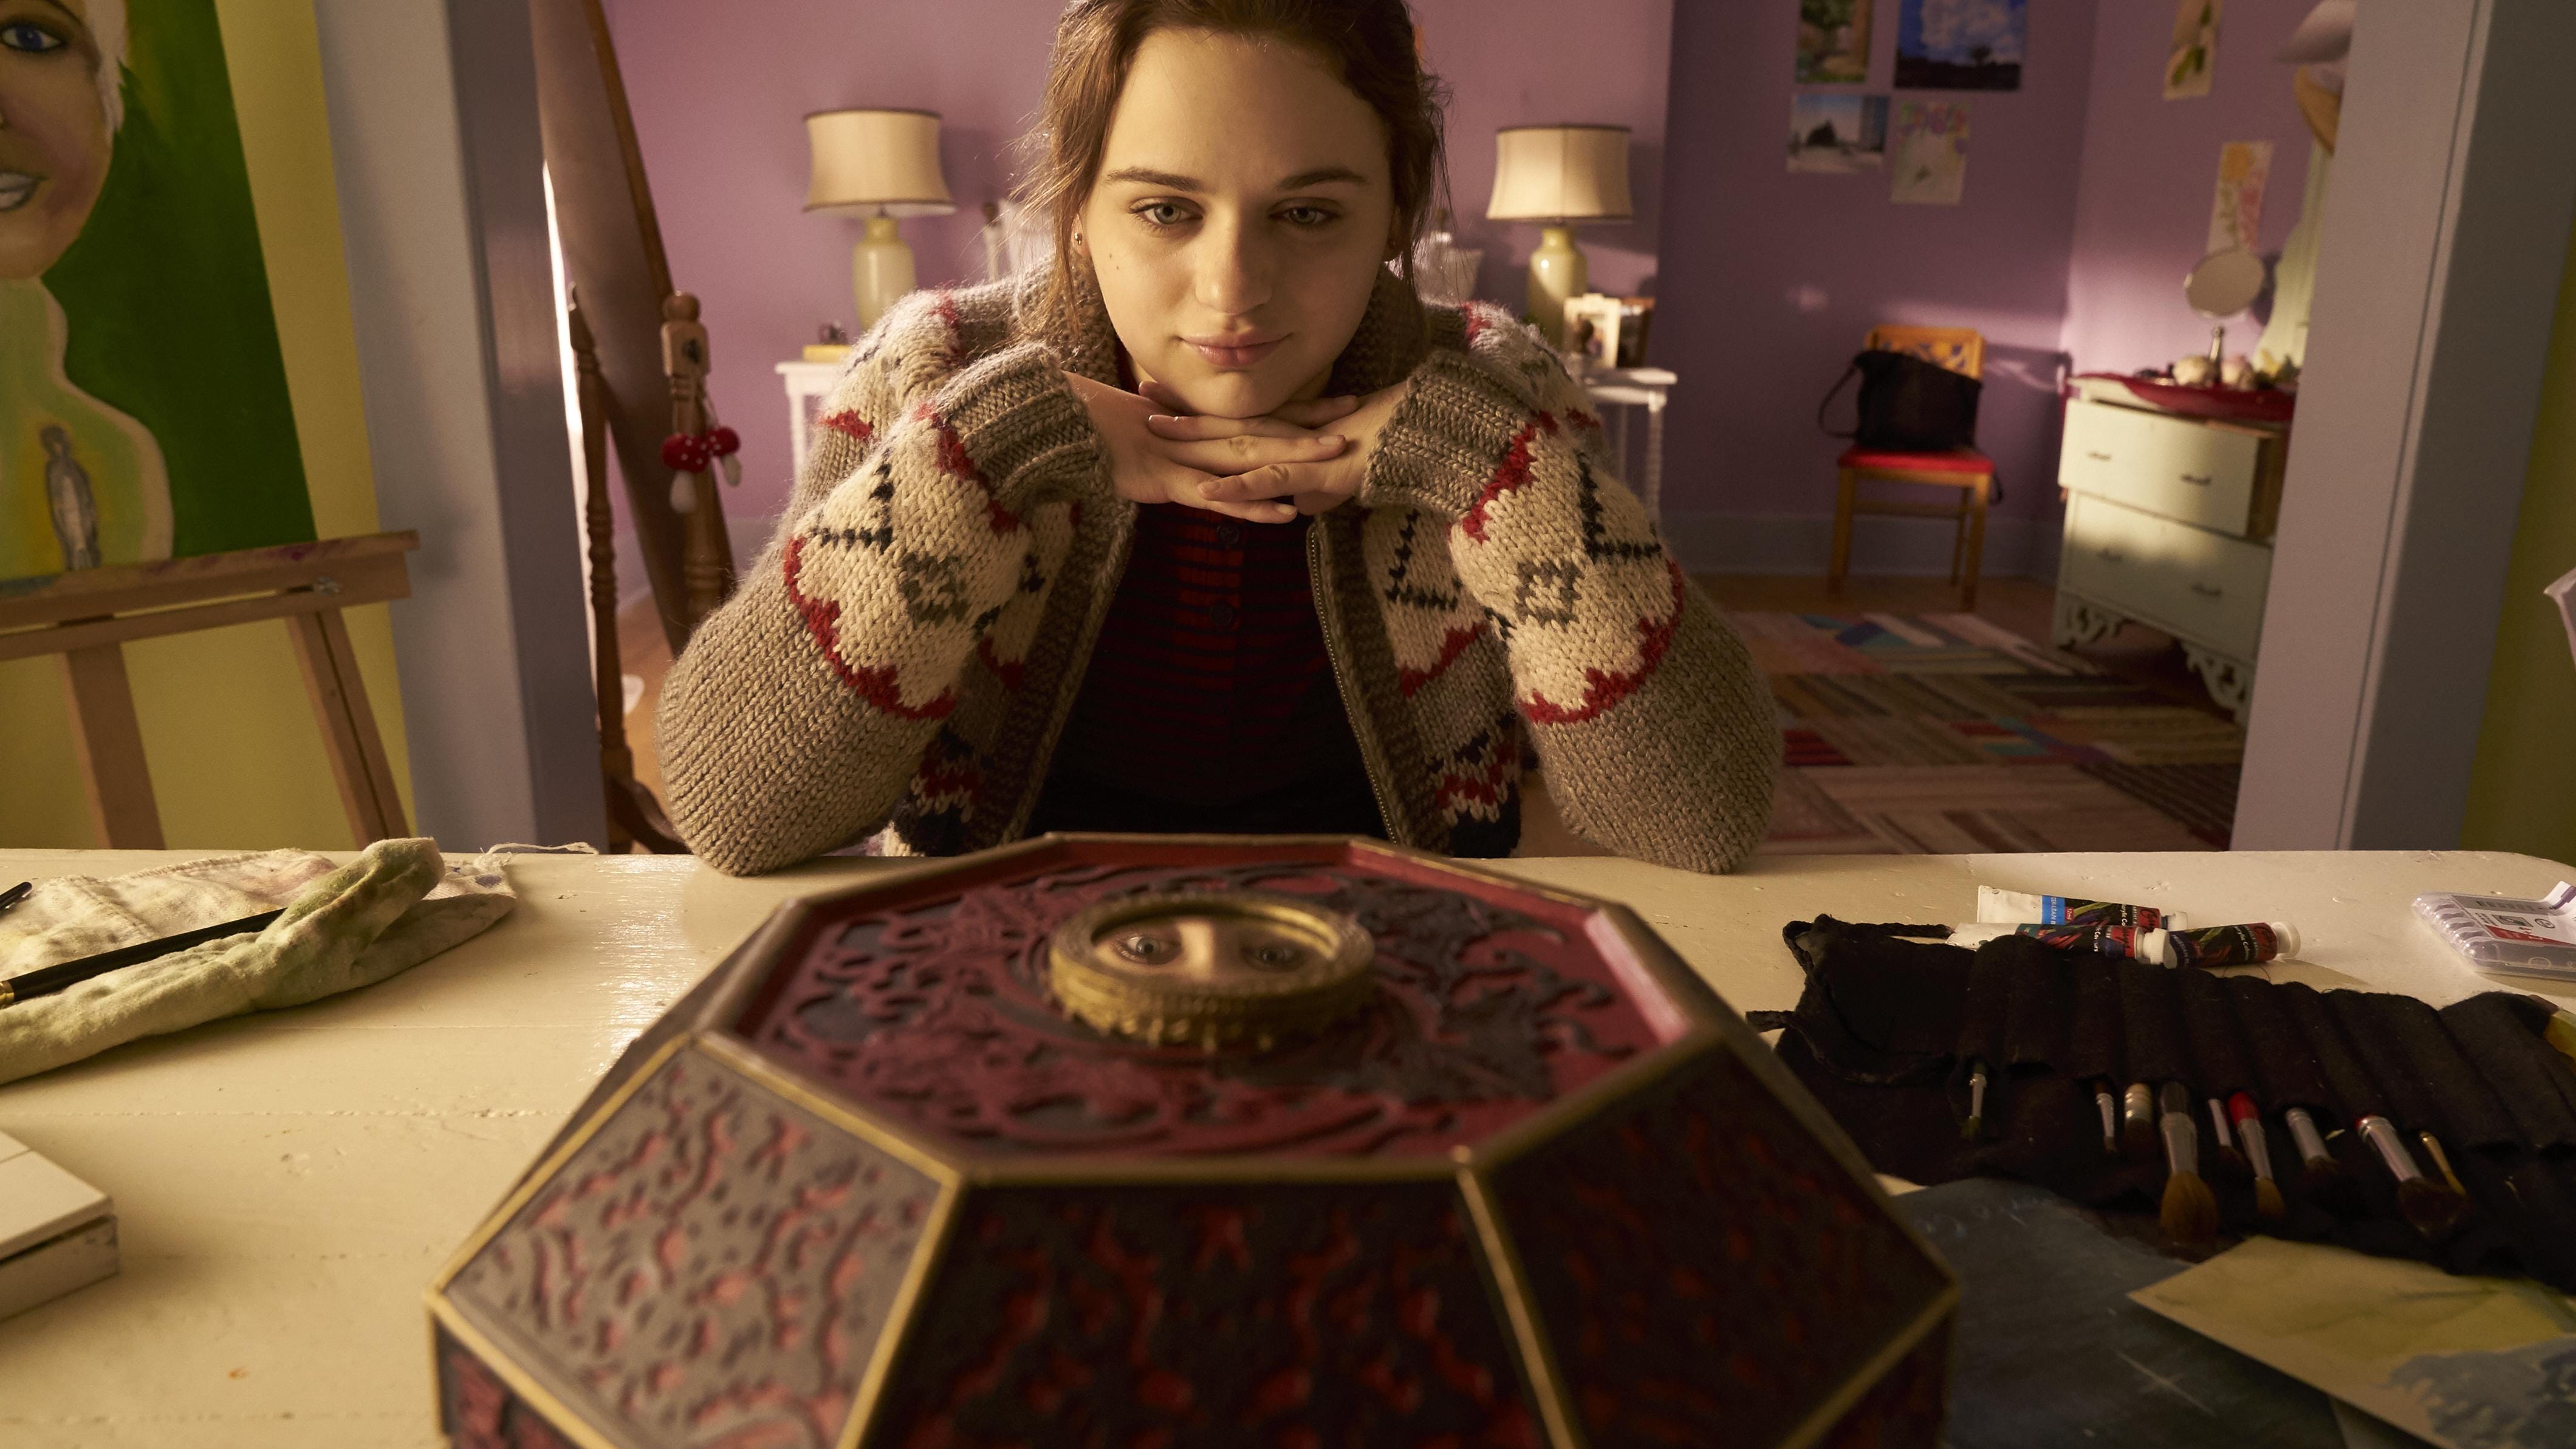 'Wish Upon' is ridiculous horror-lite